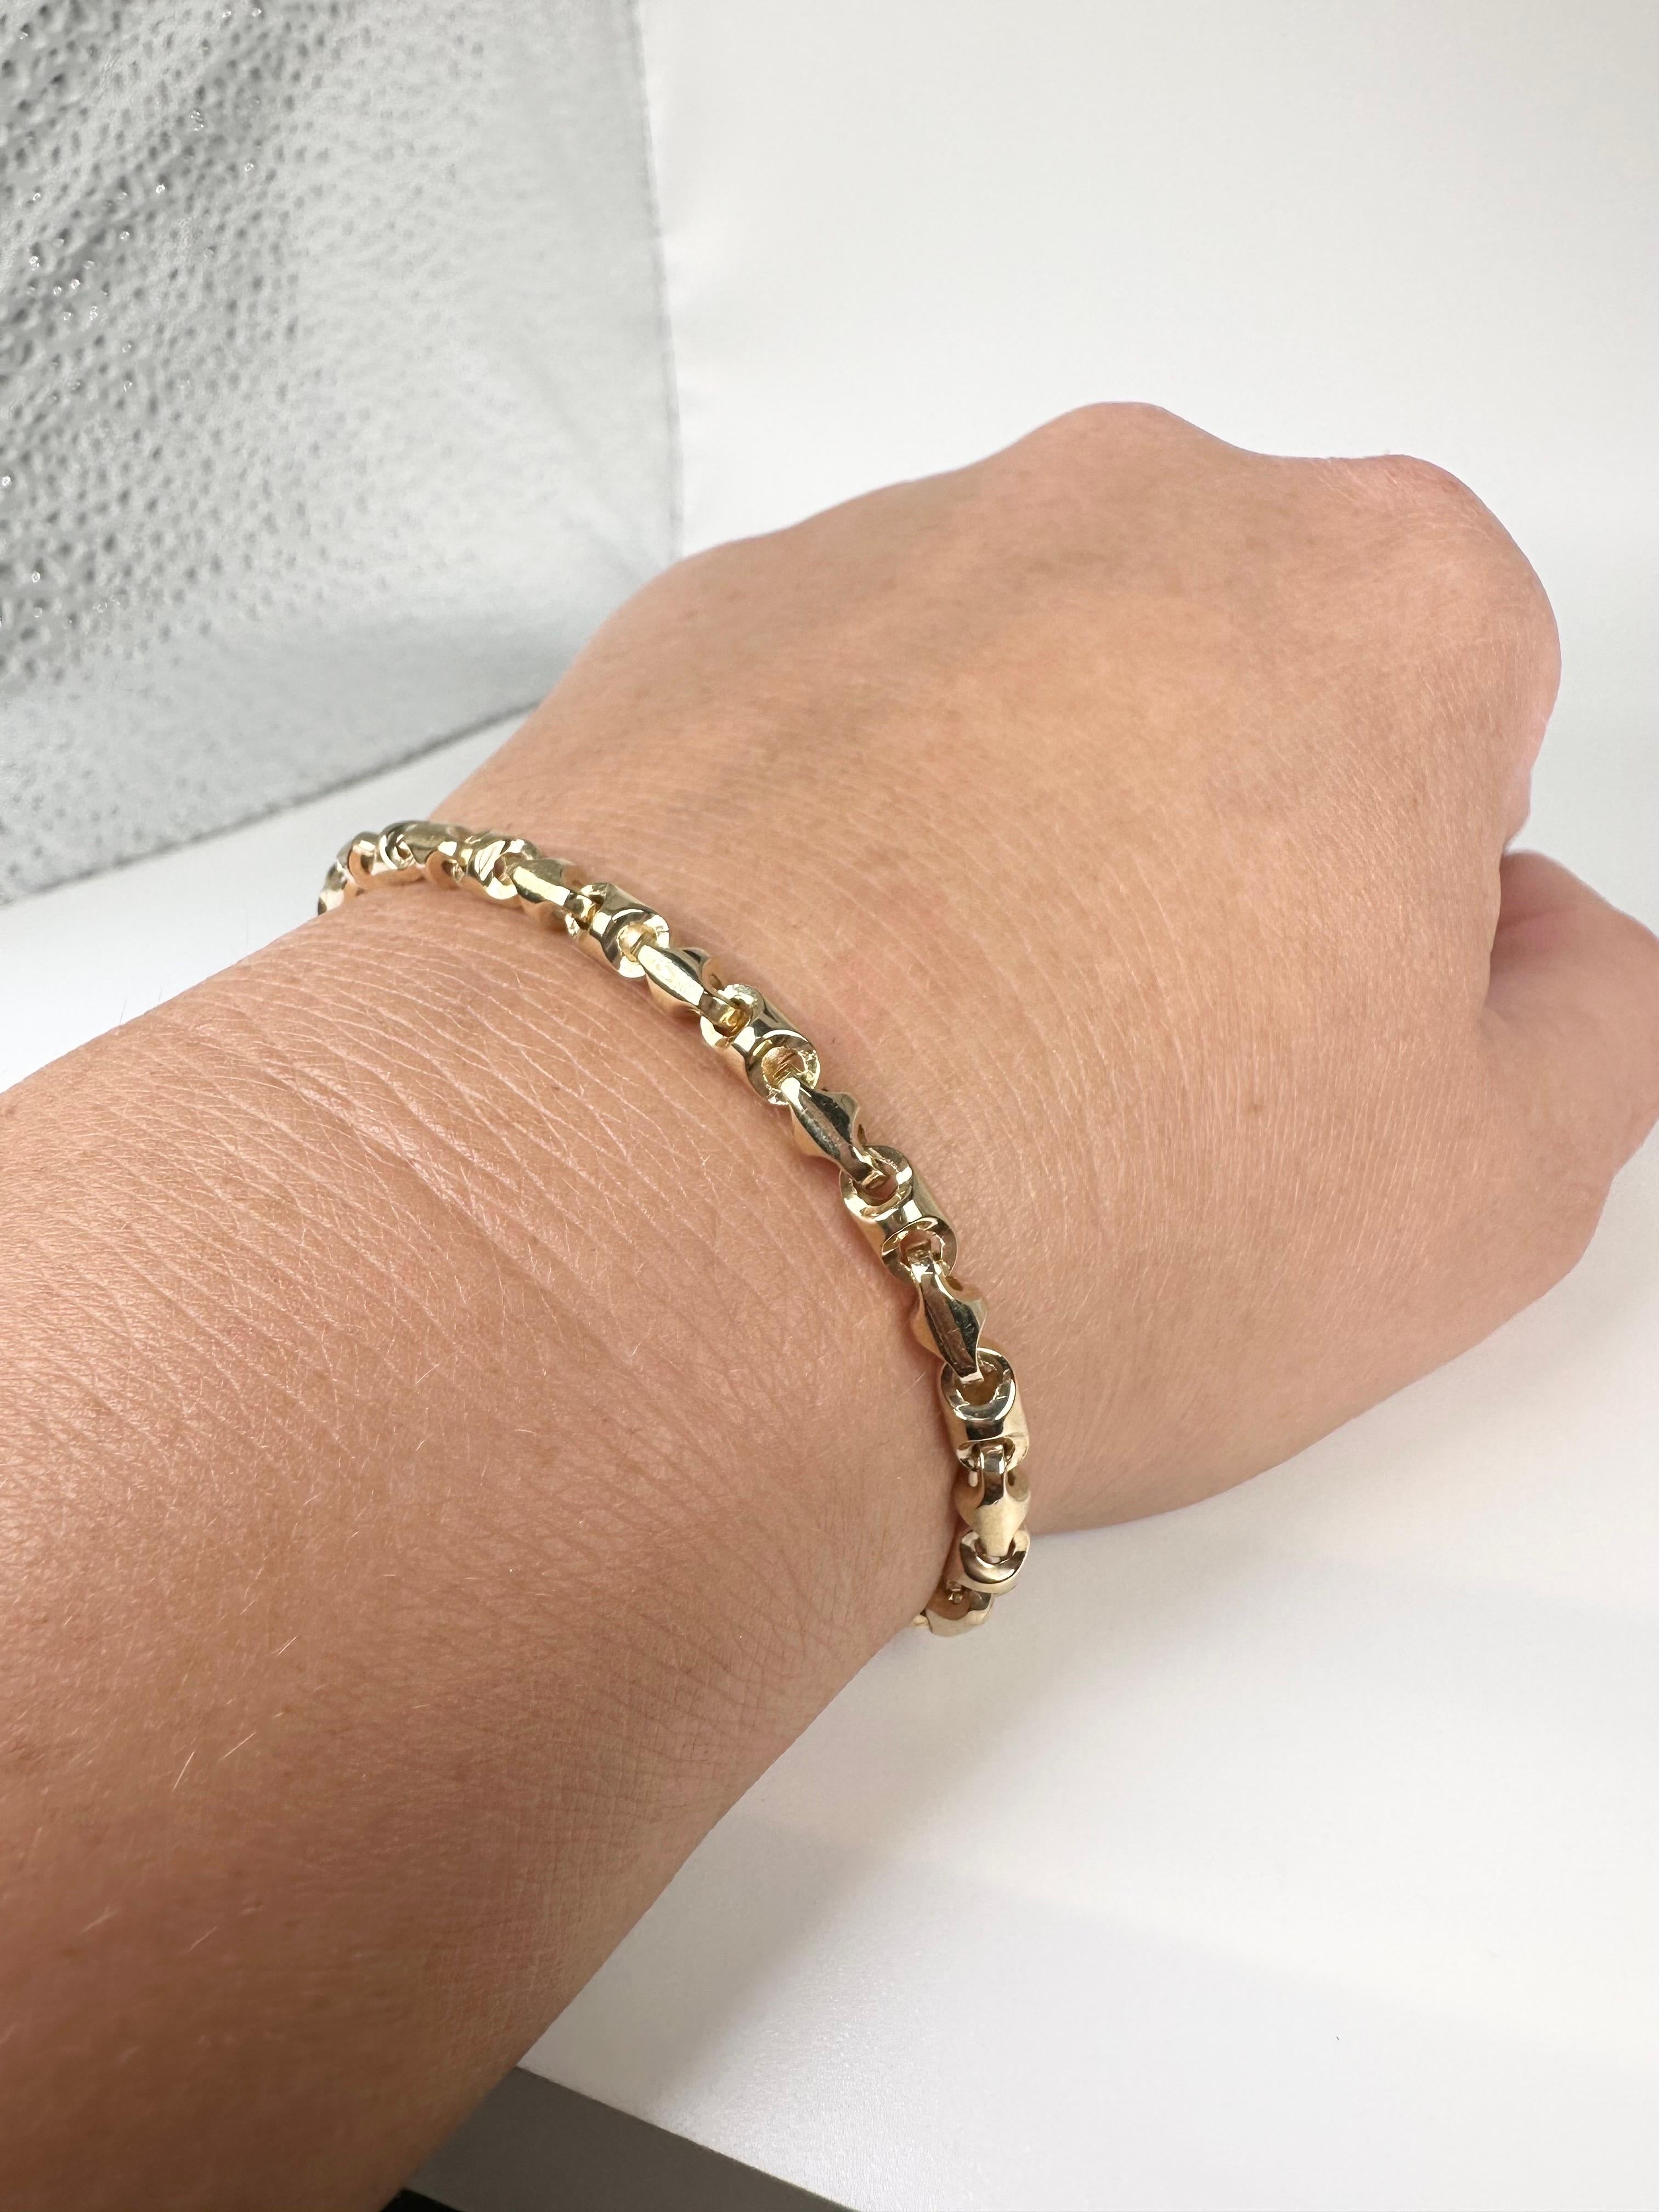 Well made and easy to put on 14KT solid gold bracelet in 18KT yellow gold, 8.5 inches long.

GOLD: 18KT gold
Width:4mm
Grams:20.47
Item 44000043mttt

WHAT YOU GET AT STAMPAR JEWELERS:
Stampar Jewelers, located in the heart of Jupiter, Florida, is a